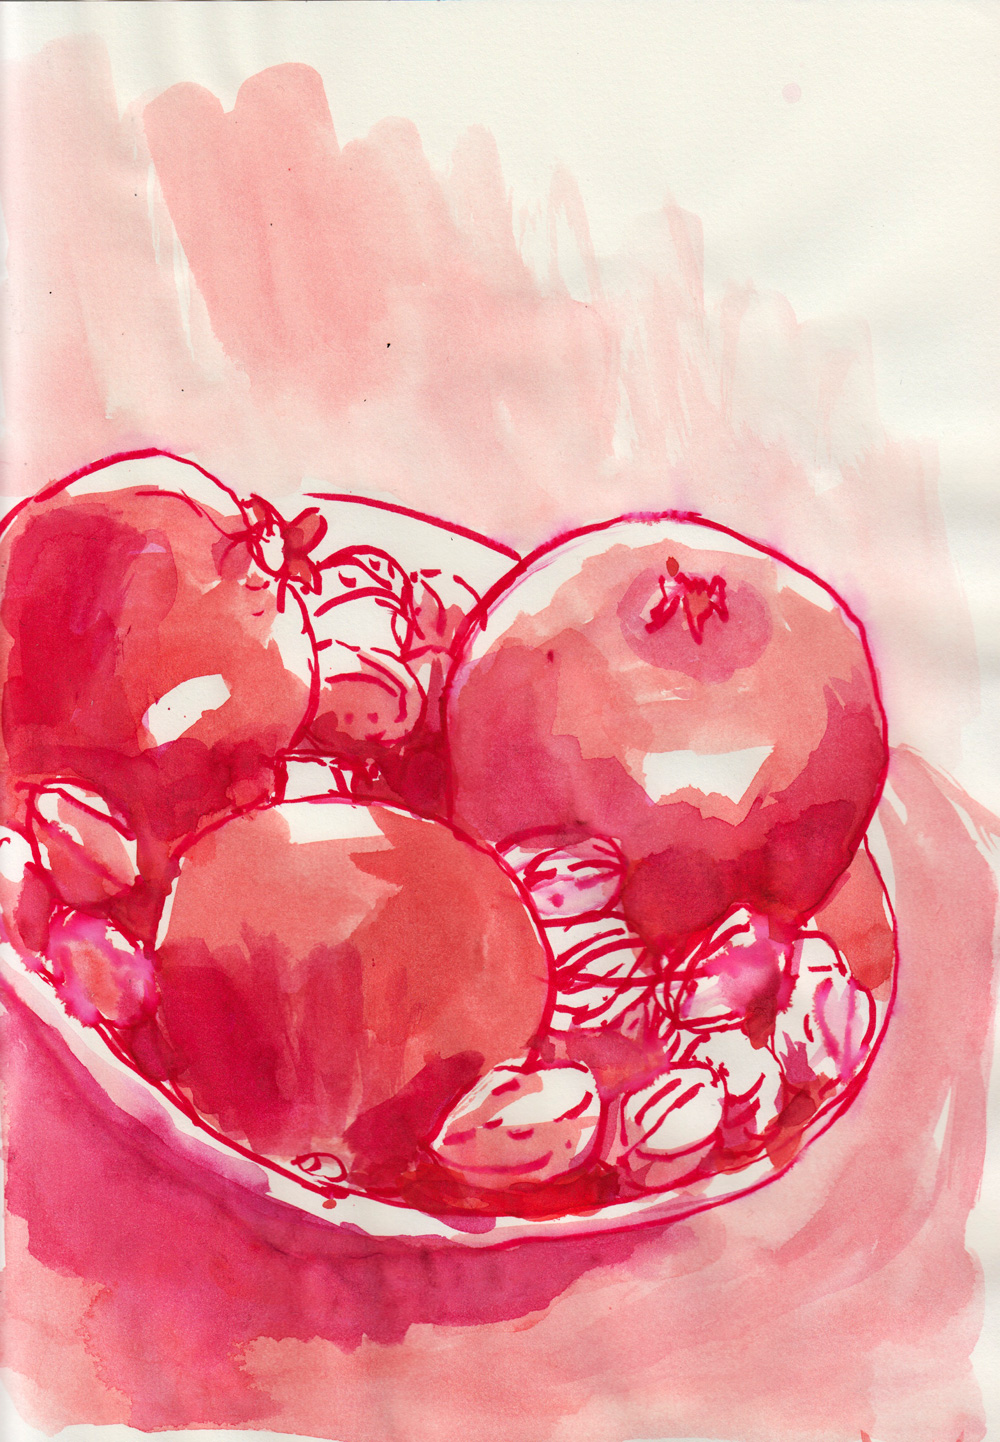 red watercolor sketch od pomegranante and walnuts